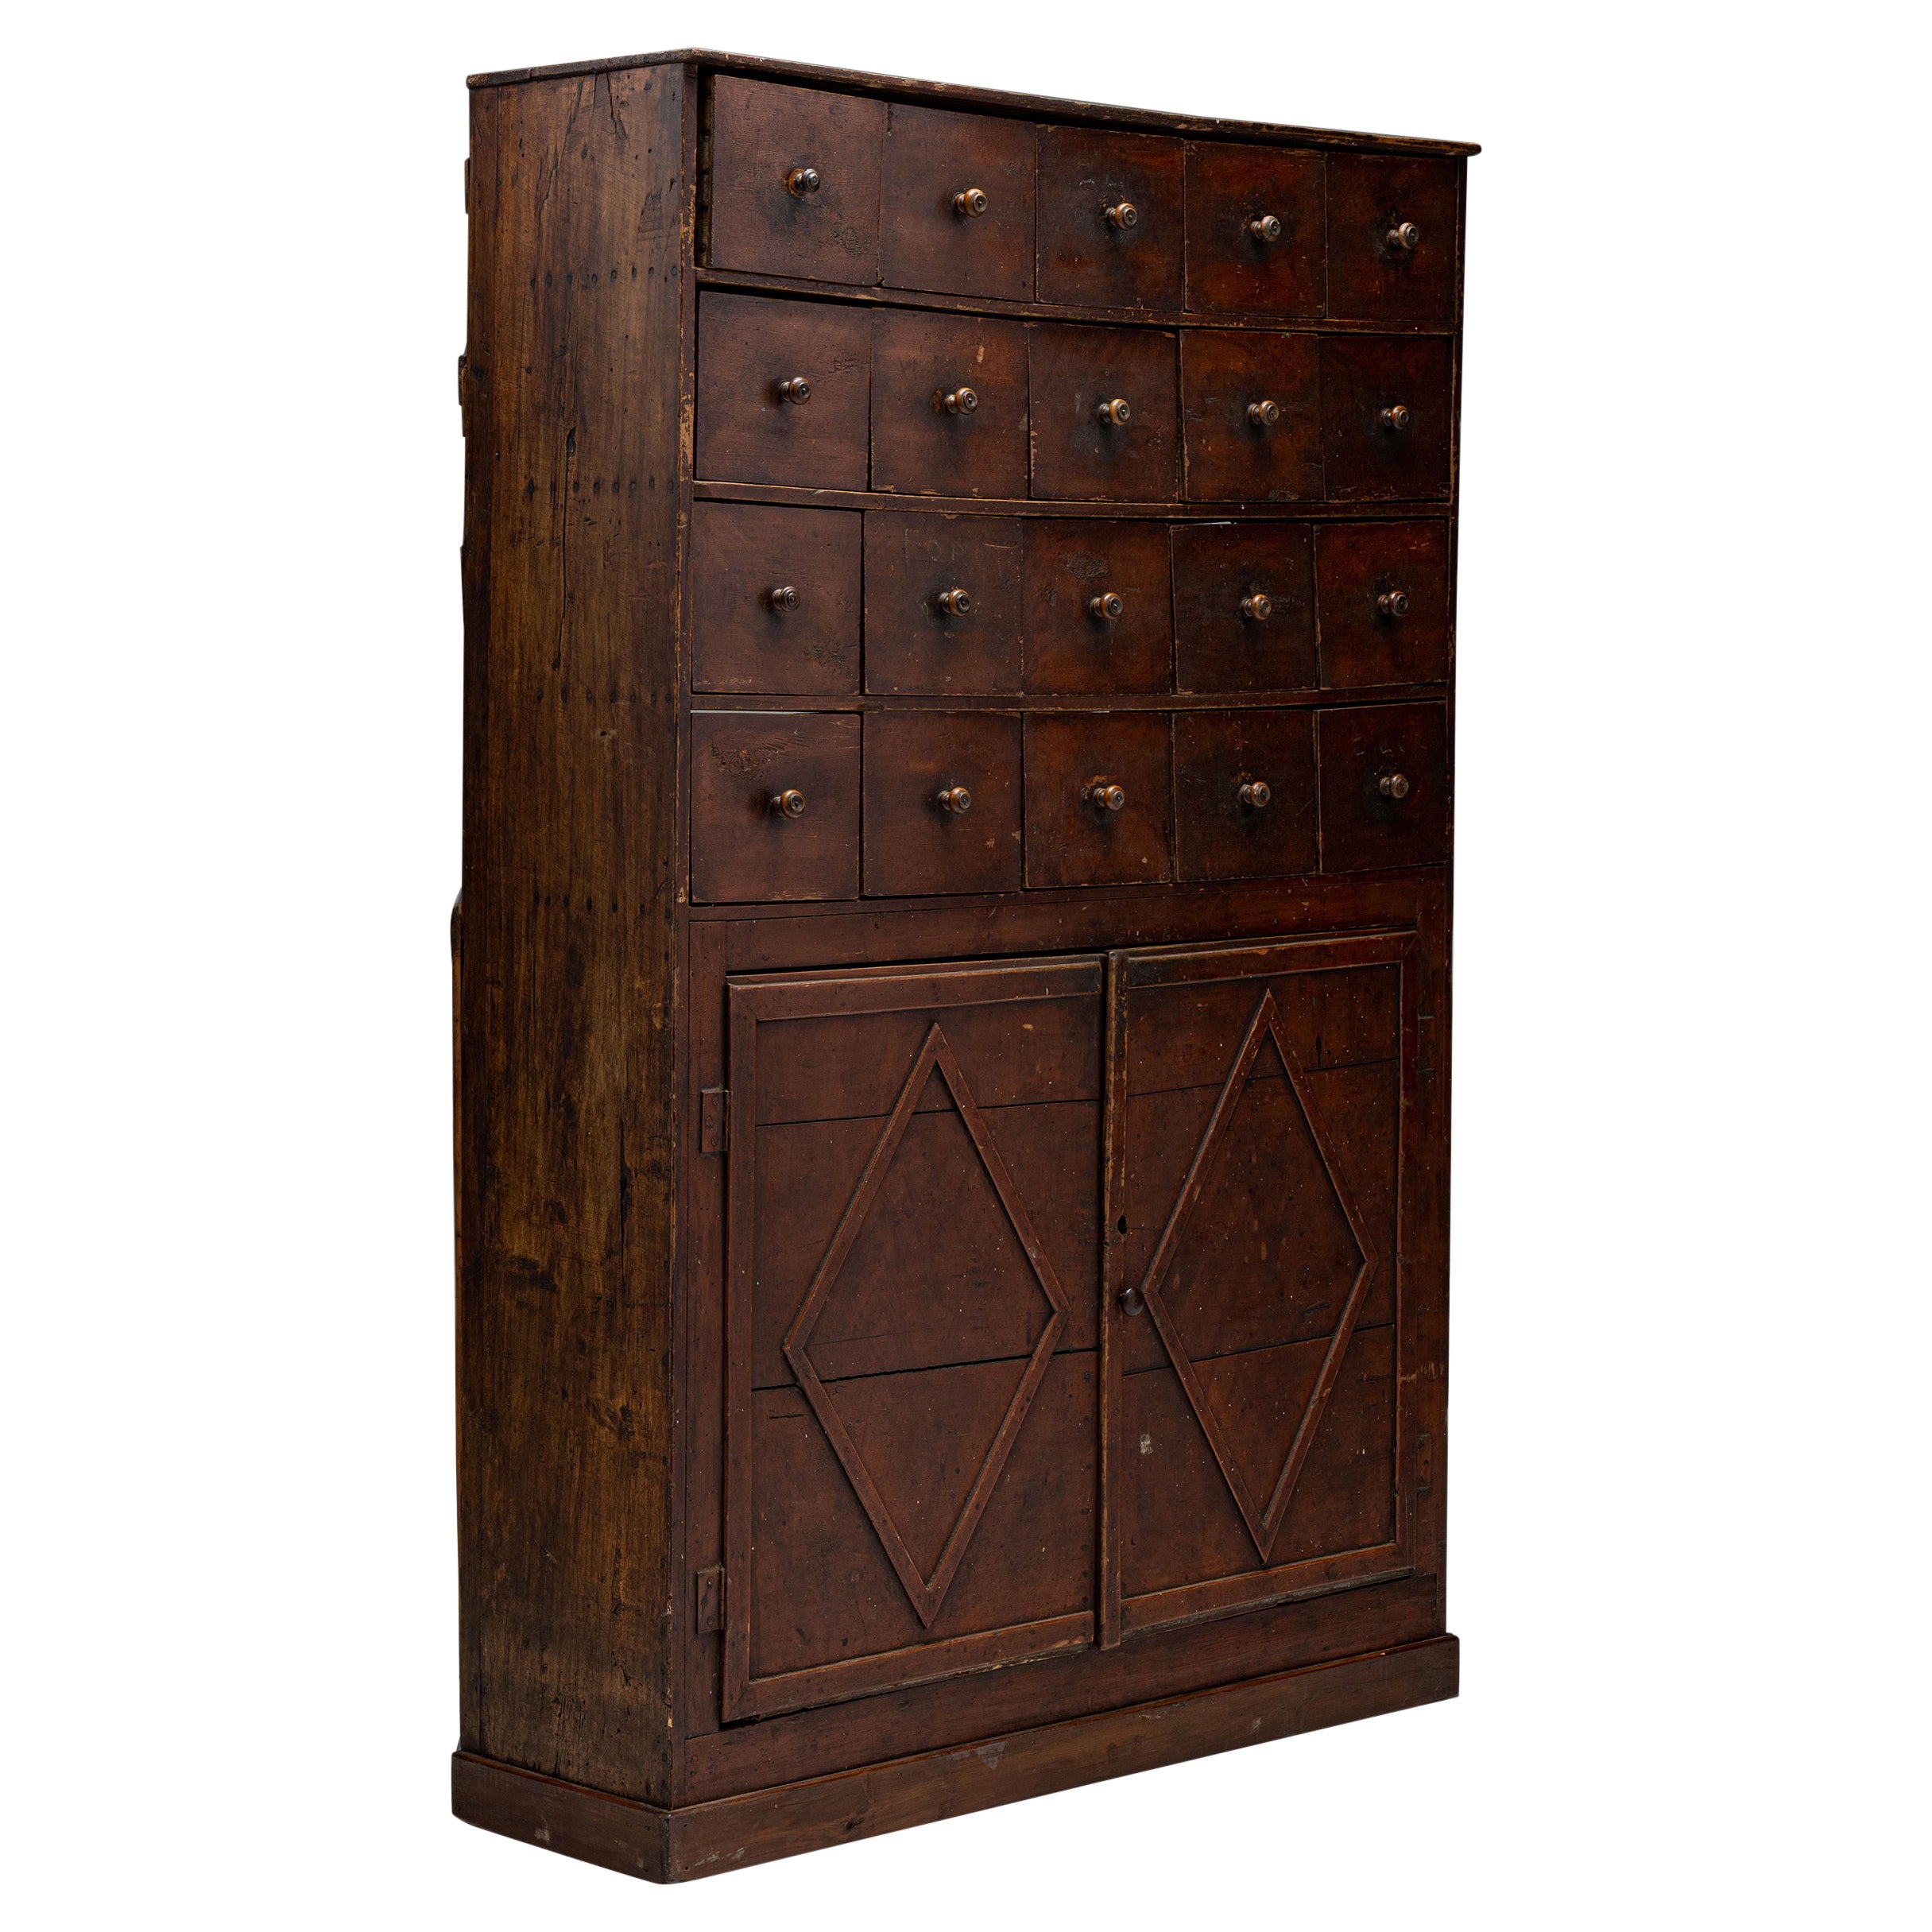 Painted Apothecary Cabinet, England, Circa 1850